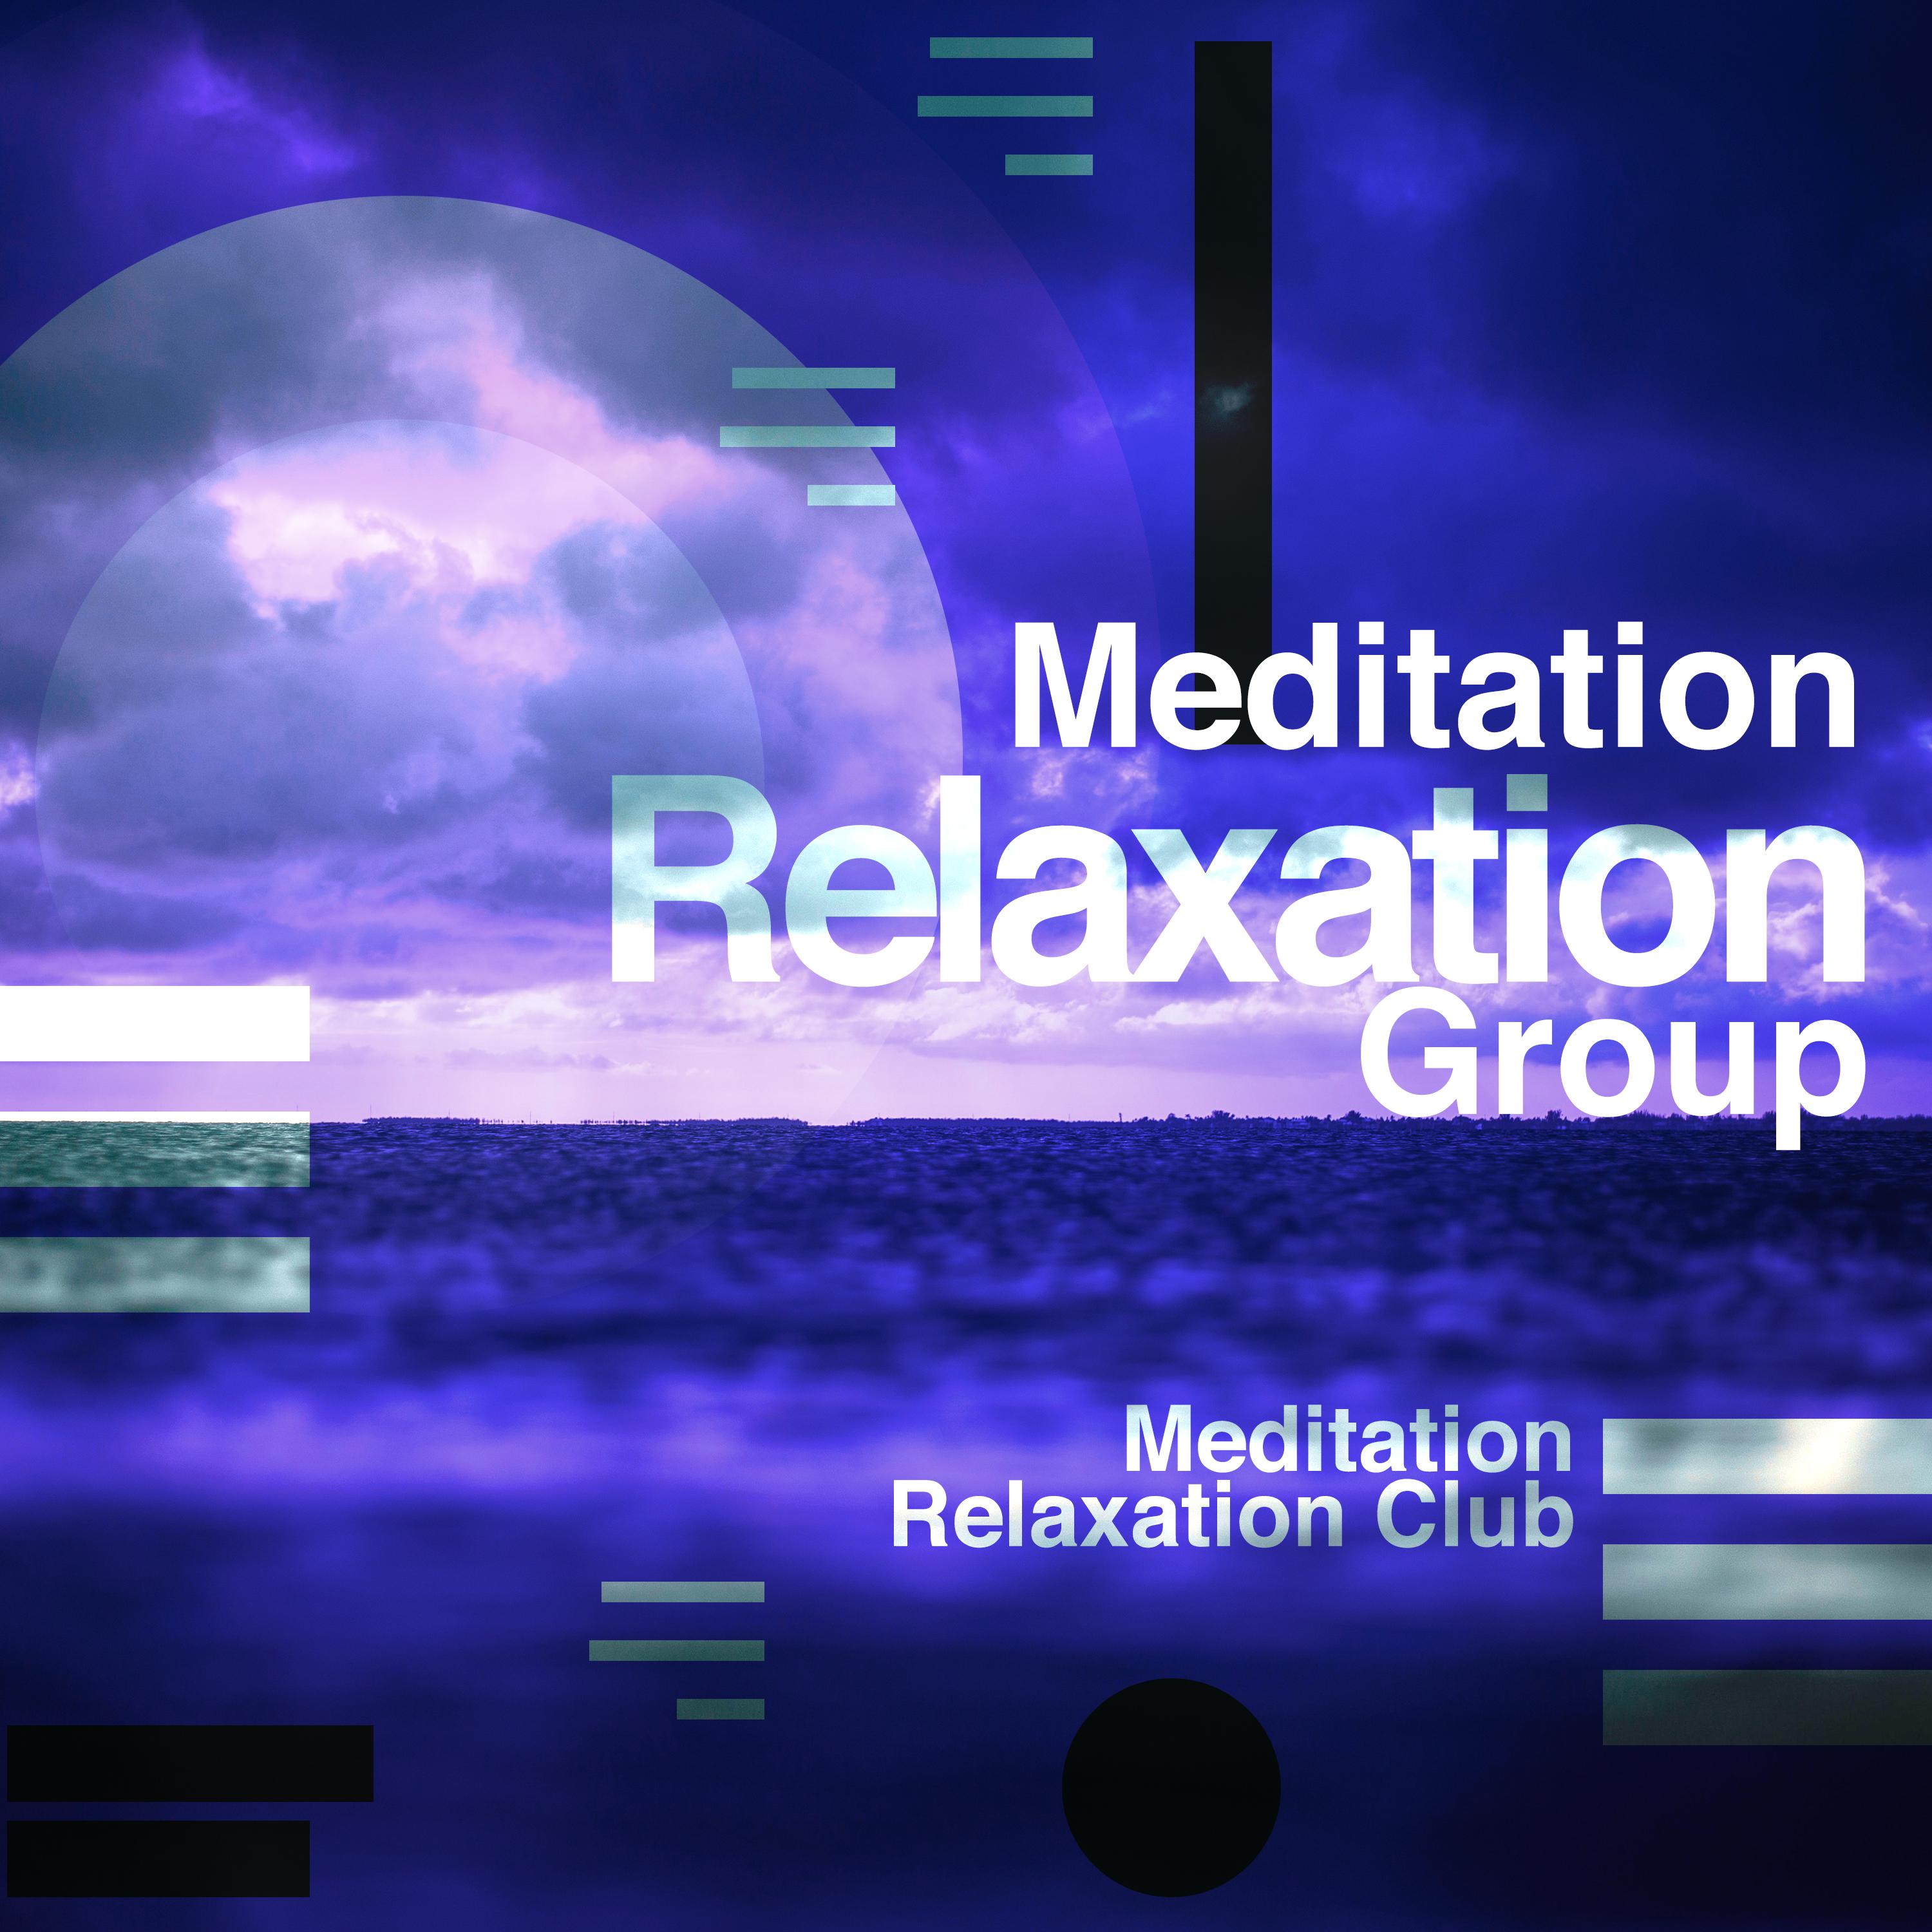 Meditation Relaxation Group